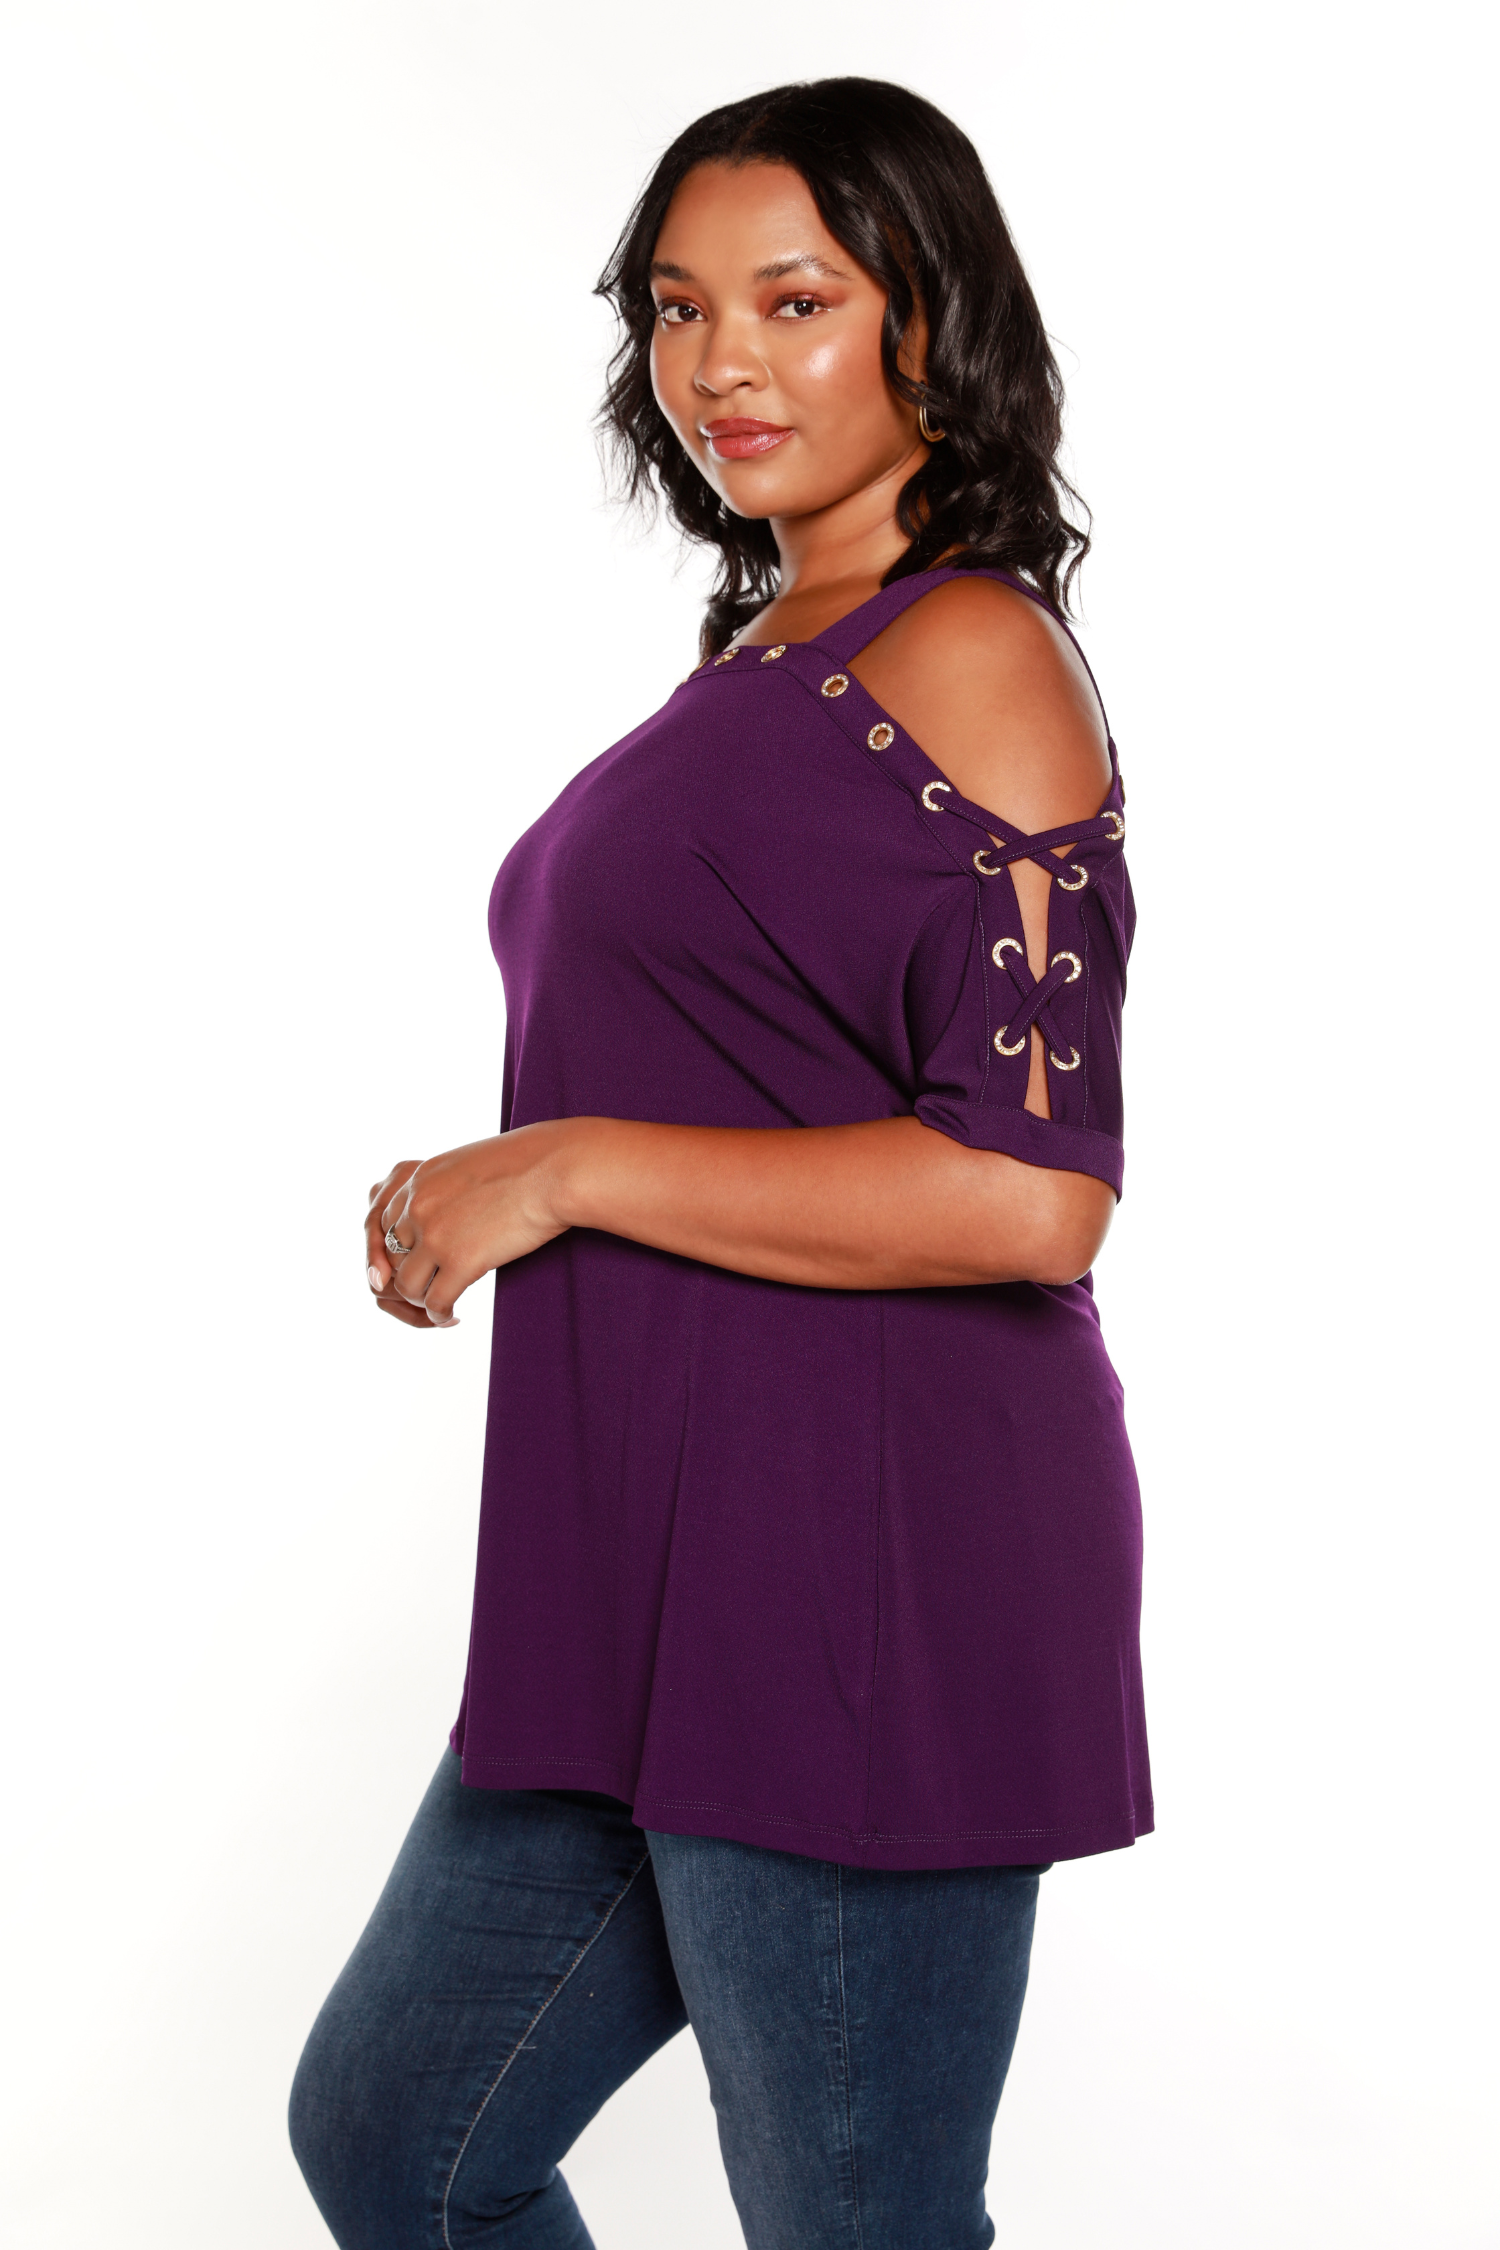 Women's Short Sleeve Cold Shoulder Top with Gold Rhinestone Lace Up Detail | Curvy